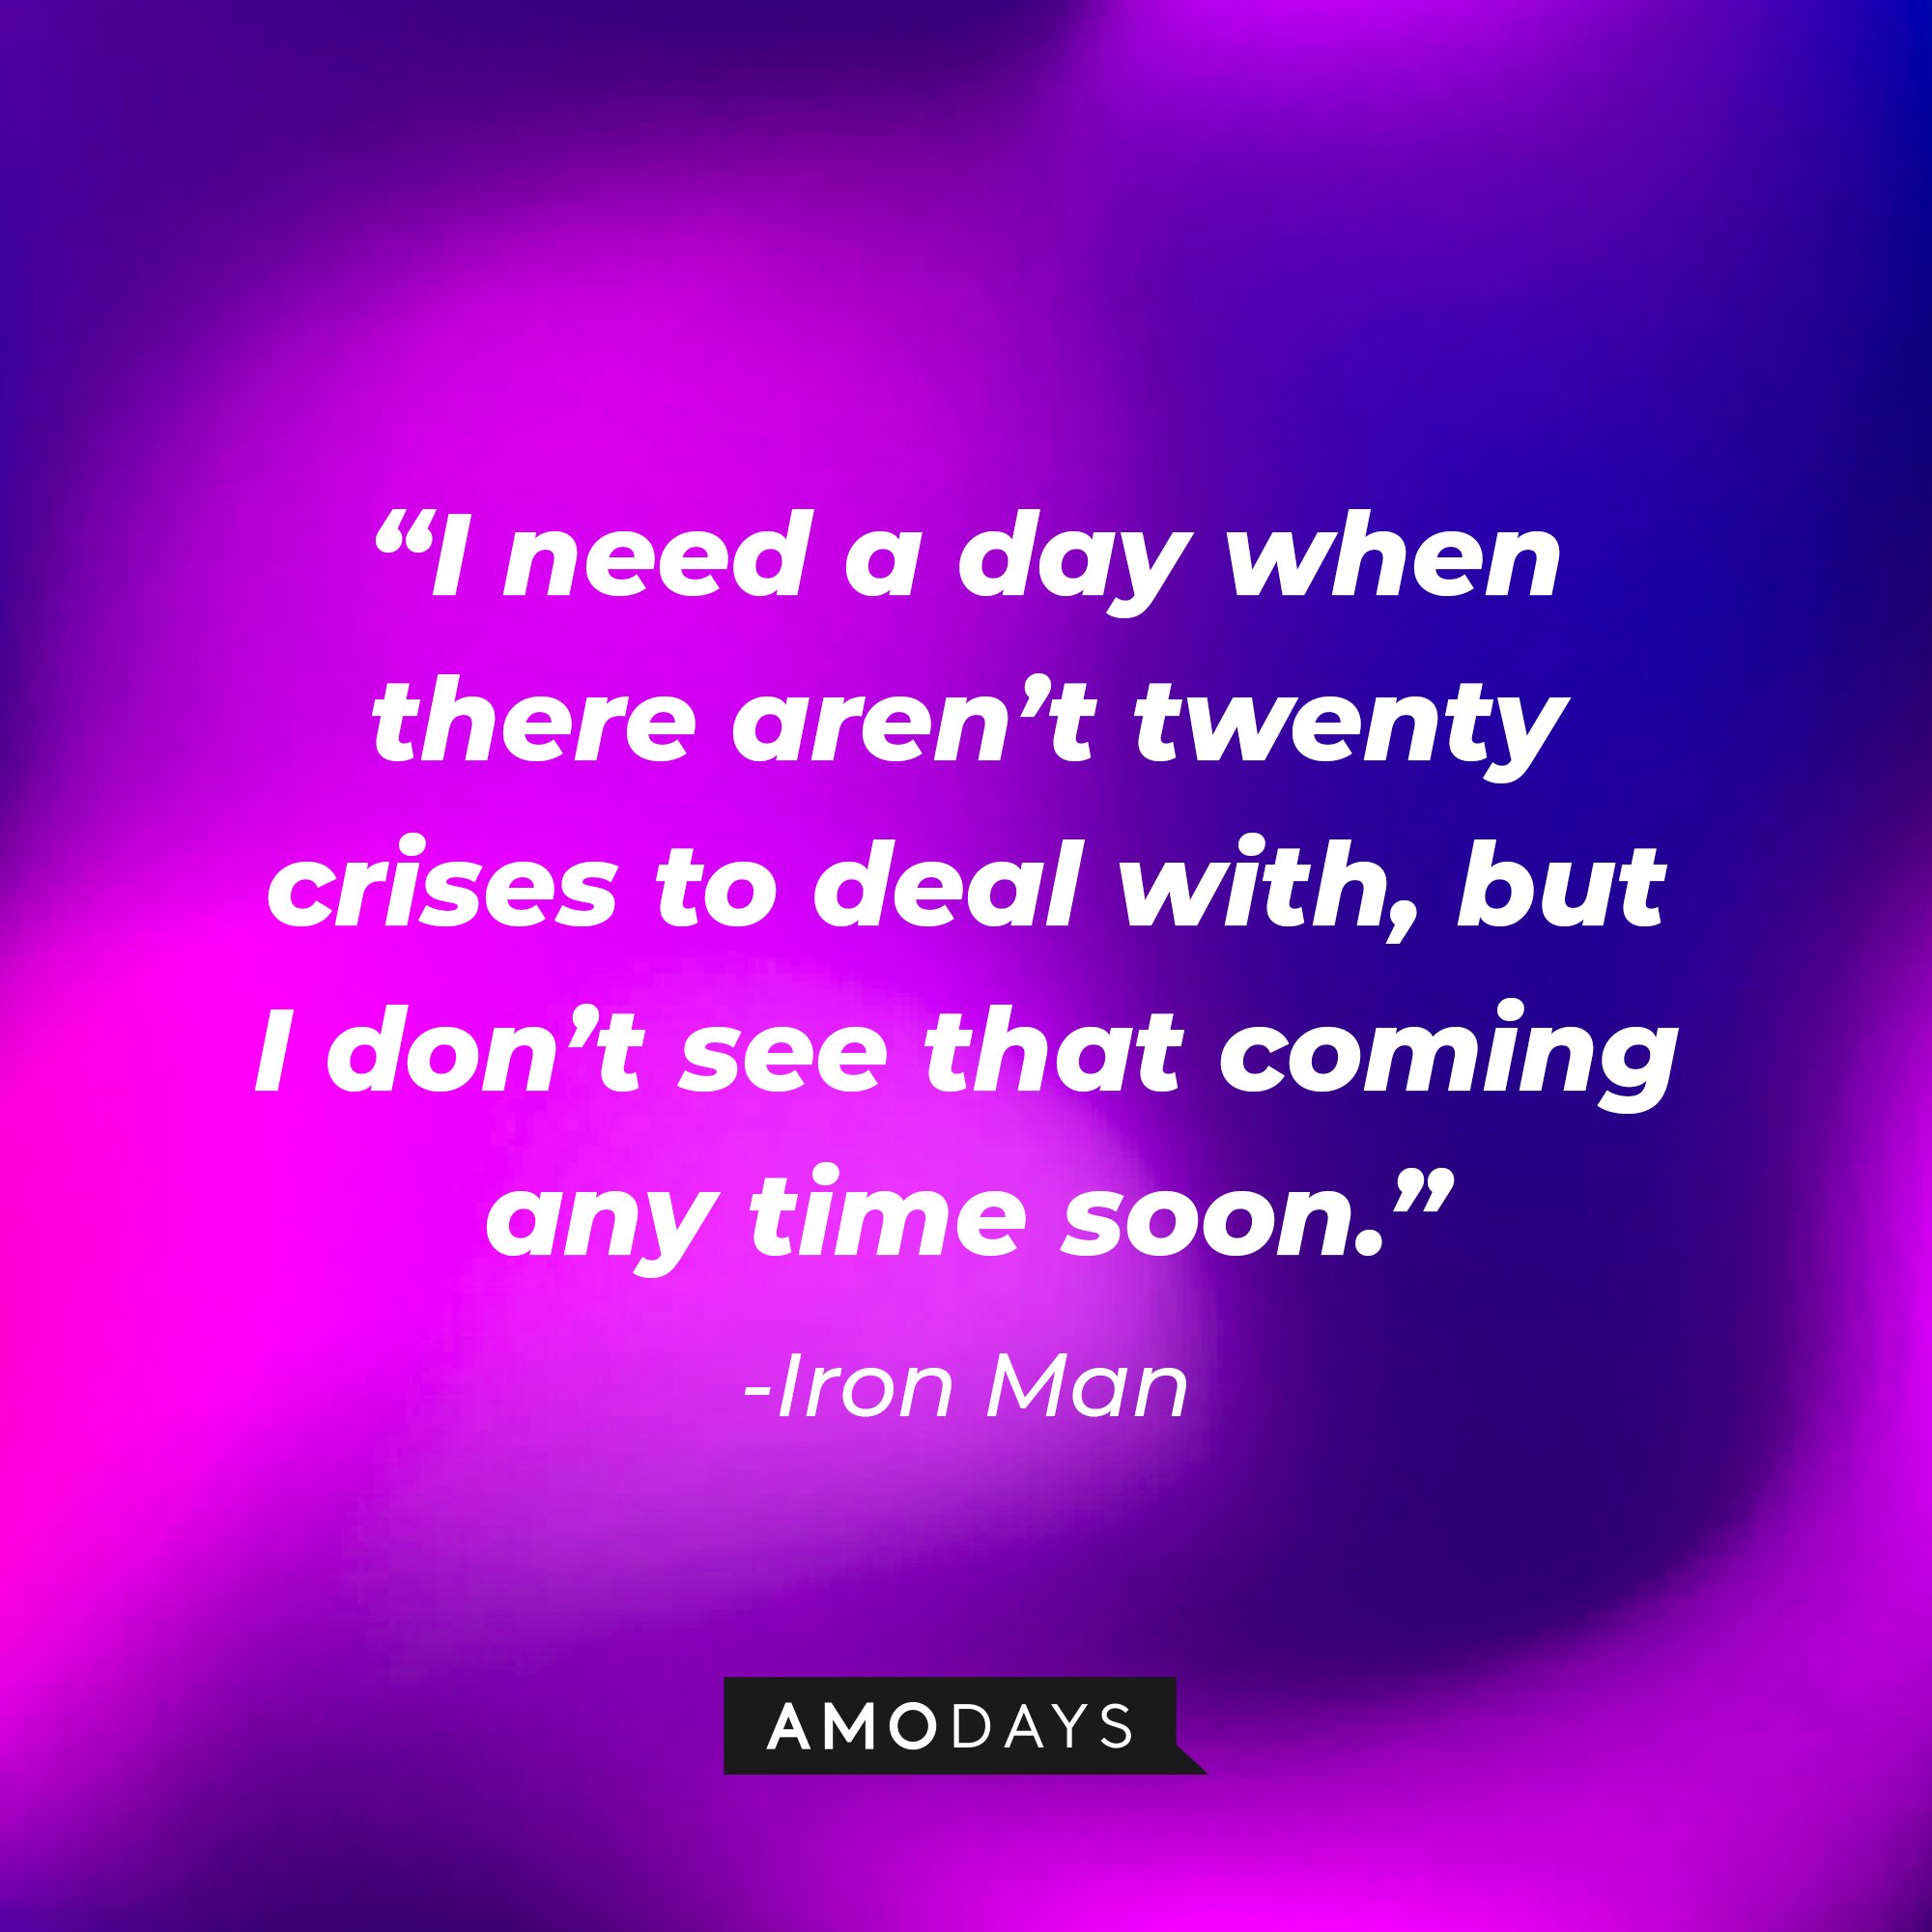 Iron Man's quote: “I need a day when there aren’t twenty crises to deal with, but I don’t see that coming any time soon.” | Image: AmoDays